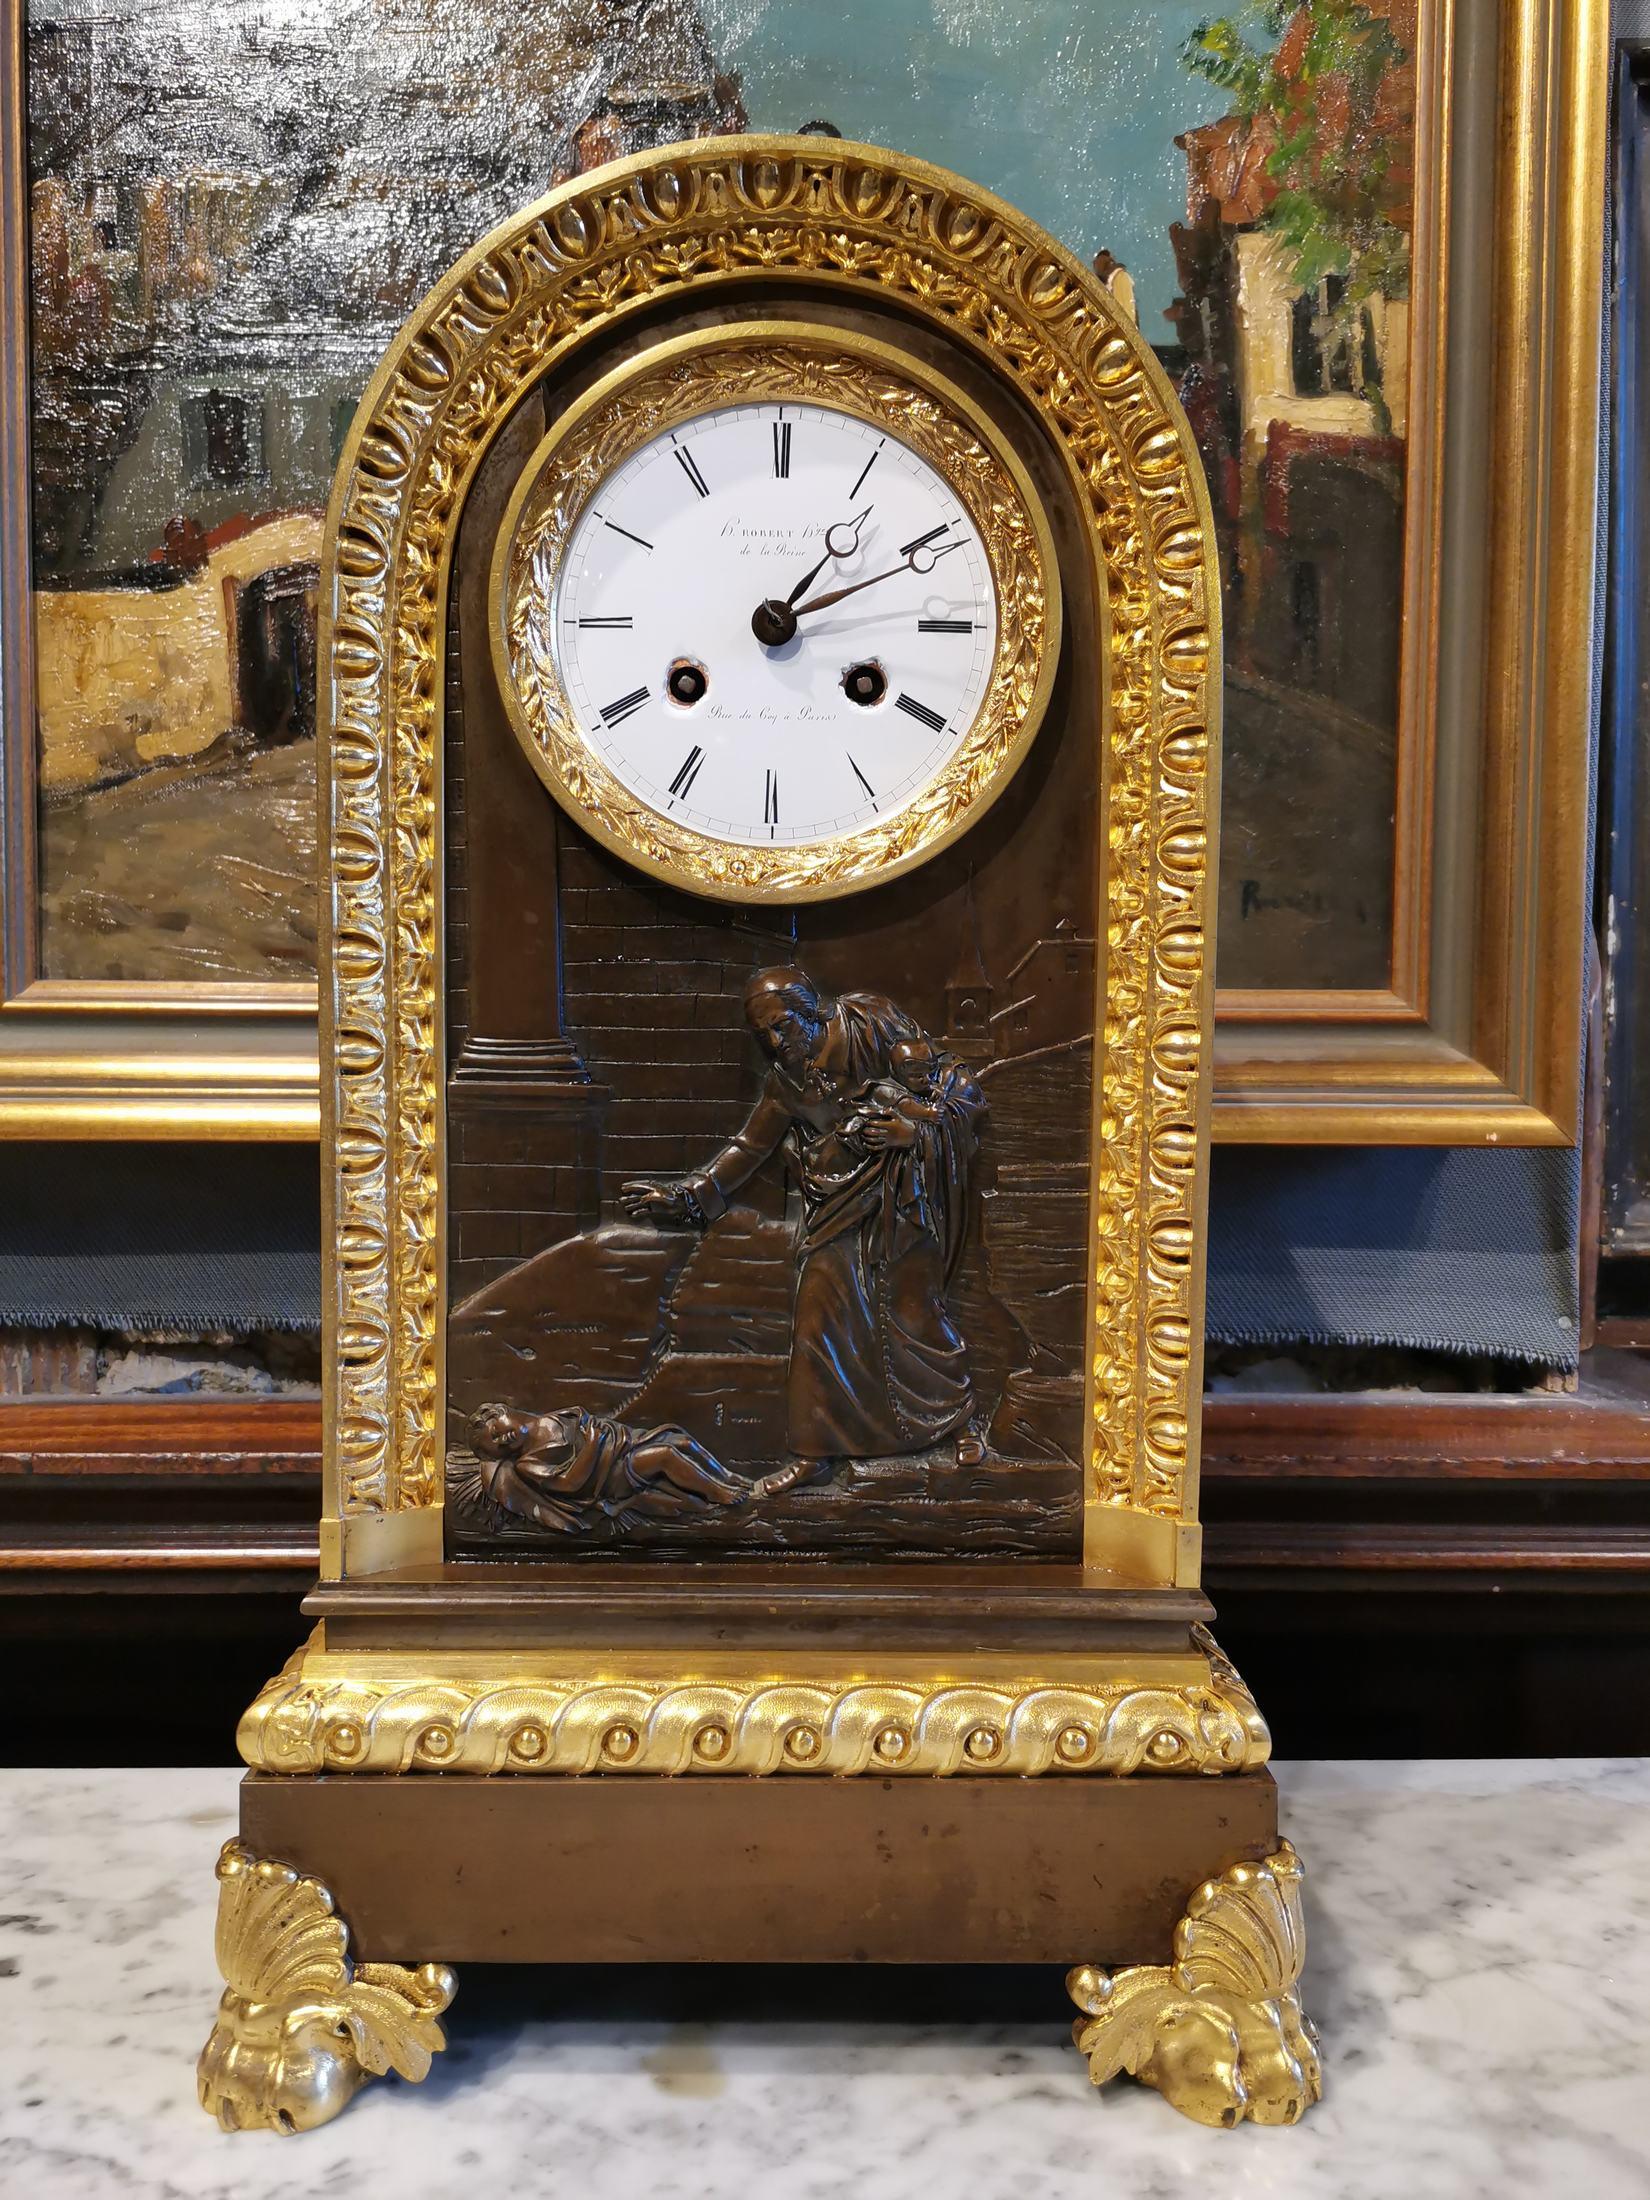 Table clock in patinated and gilded bronze from the 18th century with religious scene
Size 44 x 25 x 14 cm 1450 euro 
very good condition.